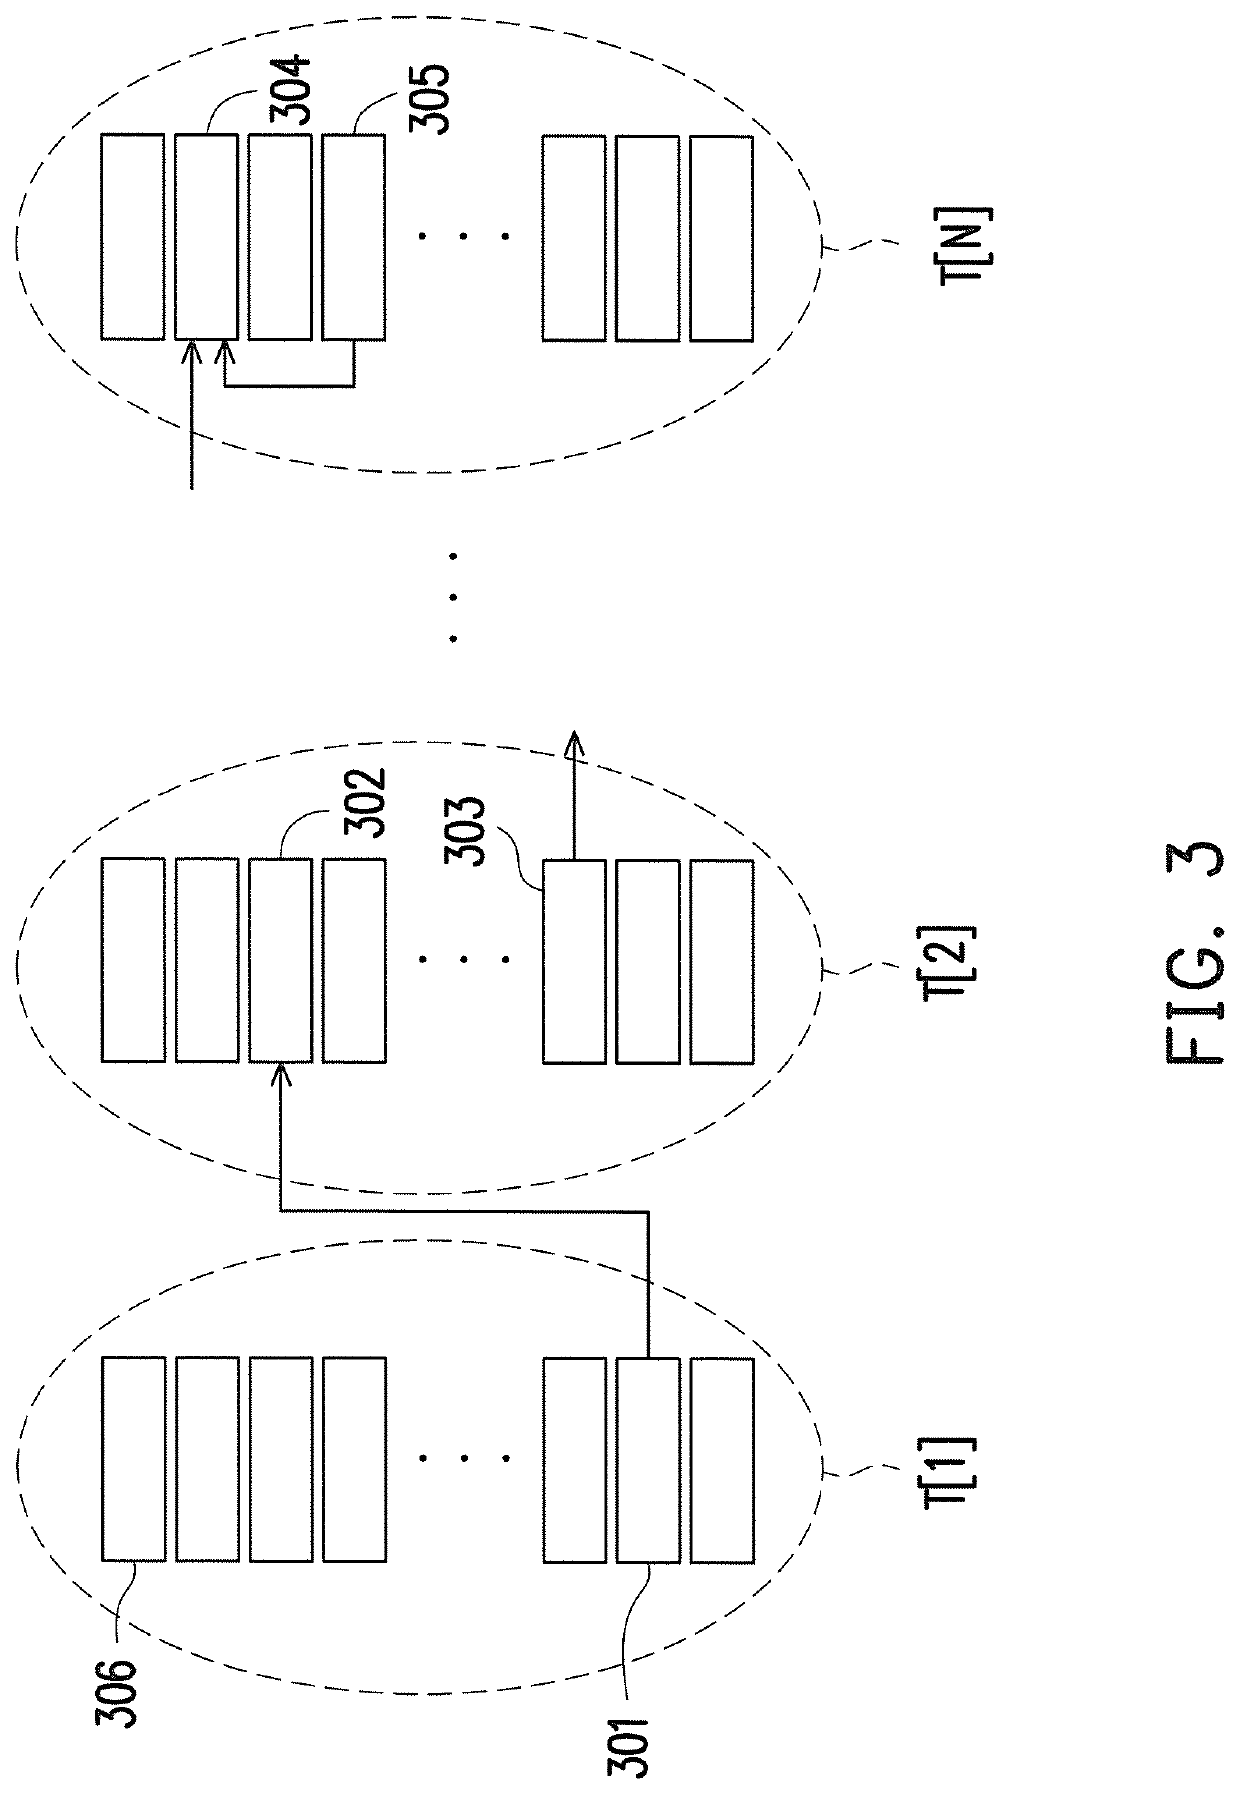 Method and apparatus for efficient garbage collection based on access probability of data